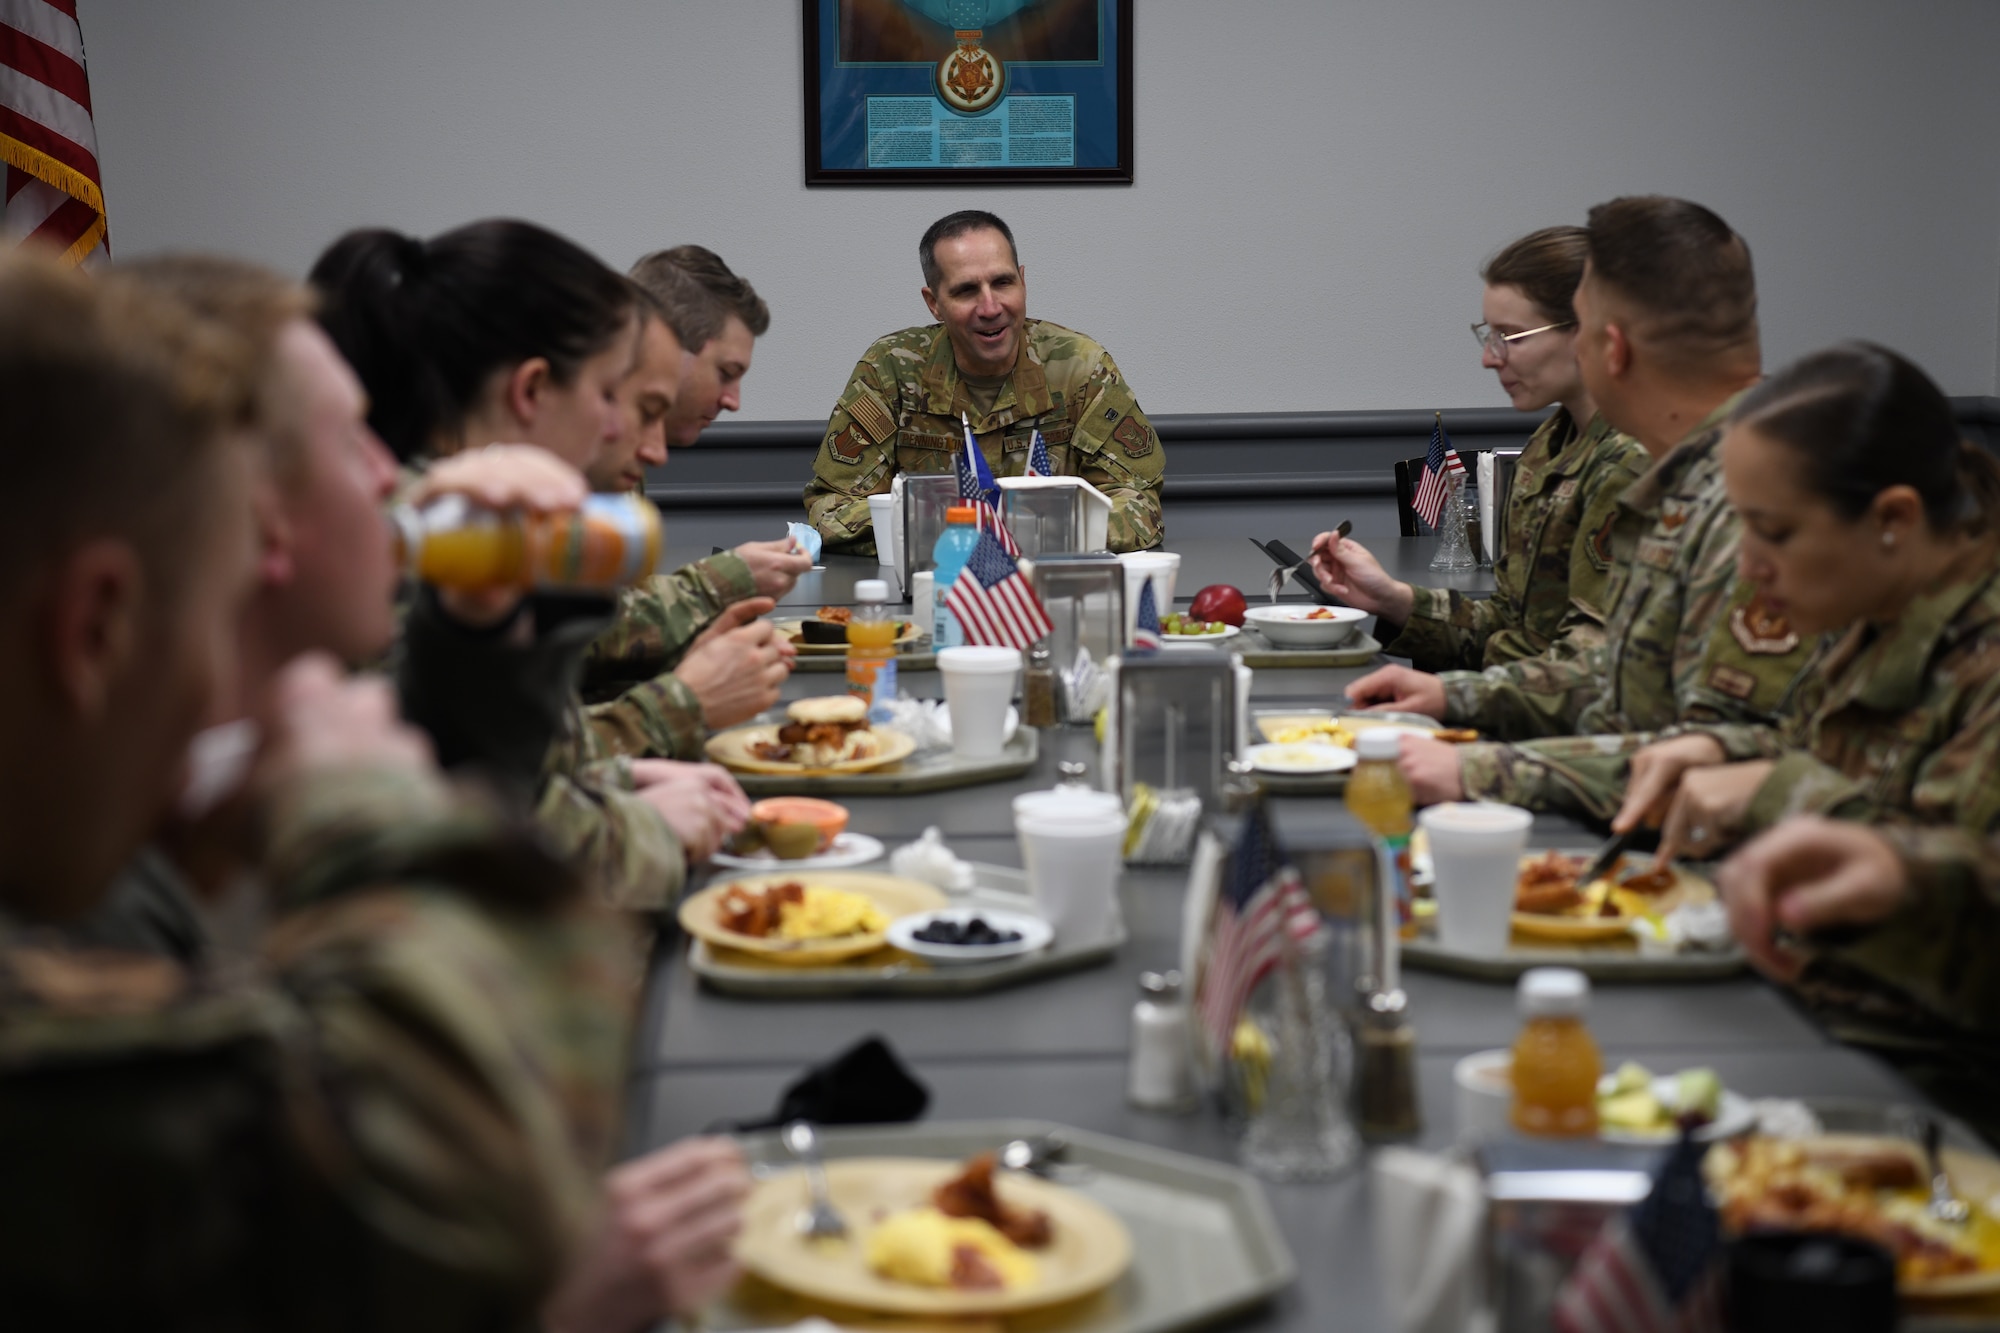 Maj. Gen. Jeffrey T. Pennington, 4th Air Force commander, speaks to 445th Airlift Wing Reserve Citizen Airmen during breakfast at the Wright-Patterson Air Force Base Pitsenbarger Dining Facility Nov. 6, 2021.